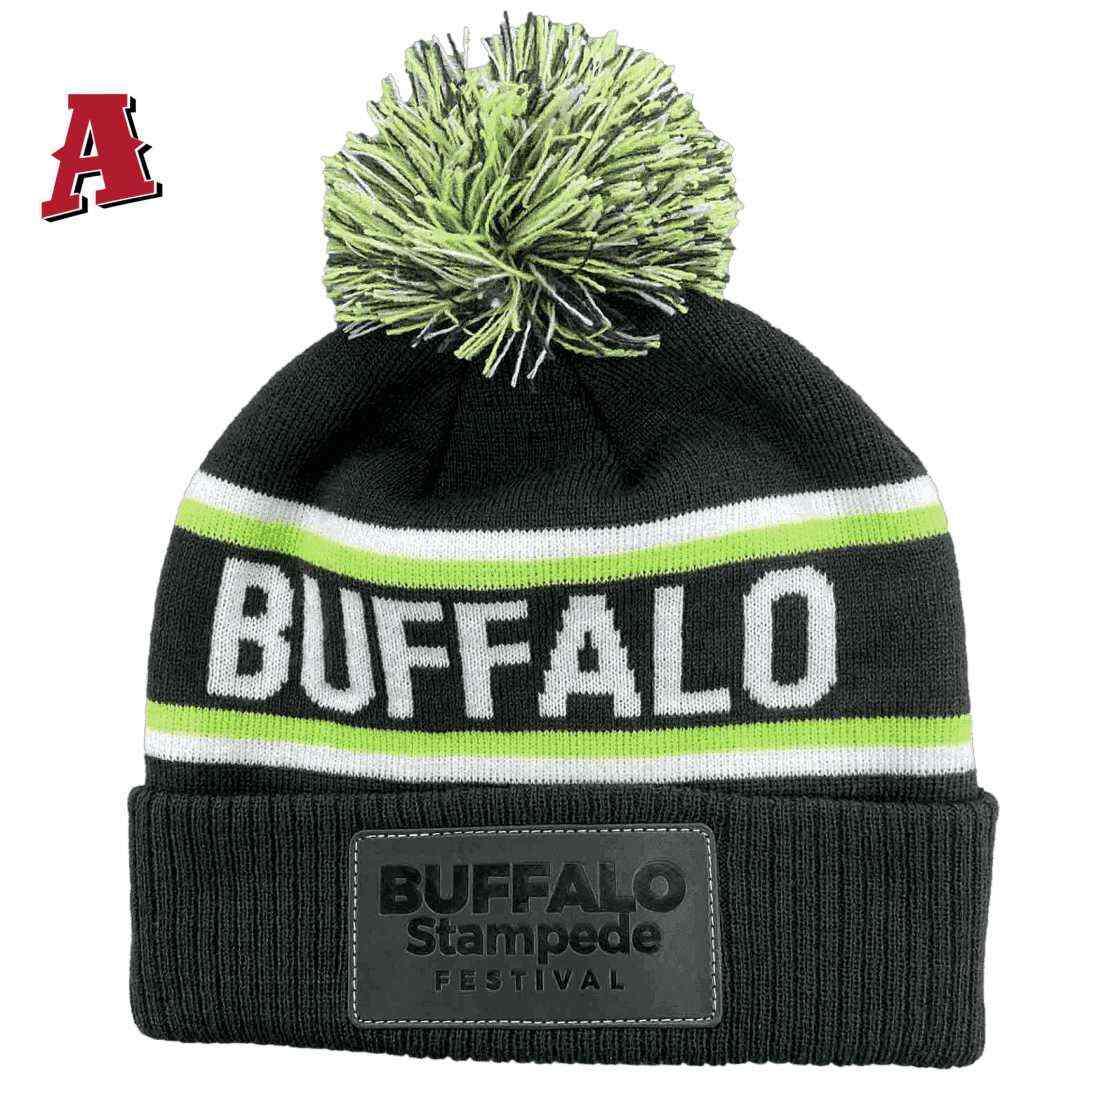 Buffalo Stampede Festival Bright VIC Aussie Trucker Hats Beanie with Acrylic Roll up Cuff with Pom Pom One Size Fits All Black White Lime